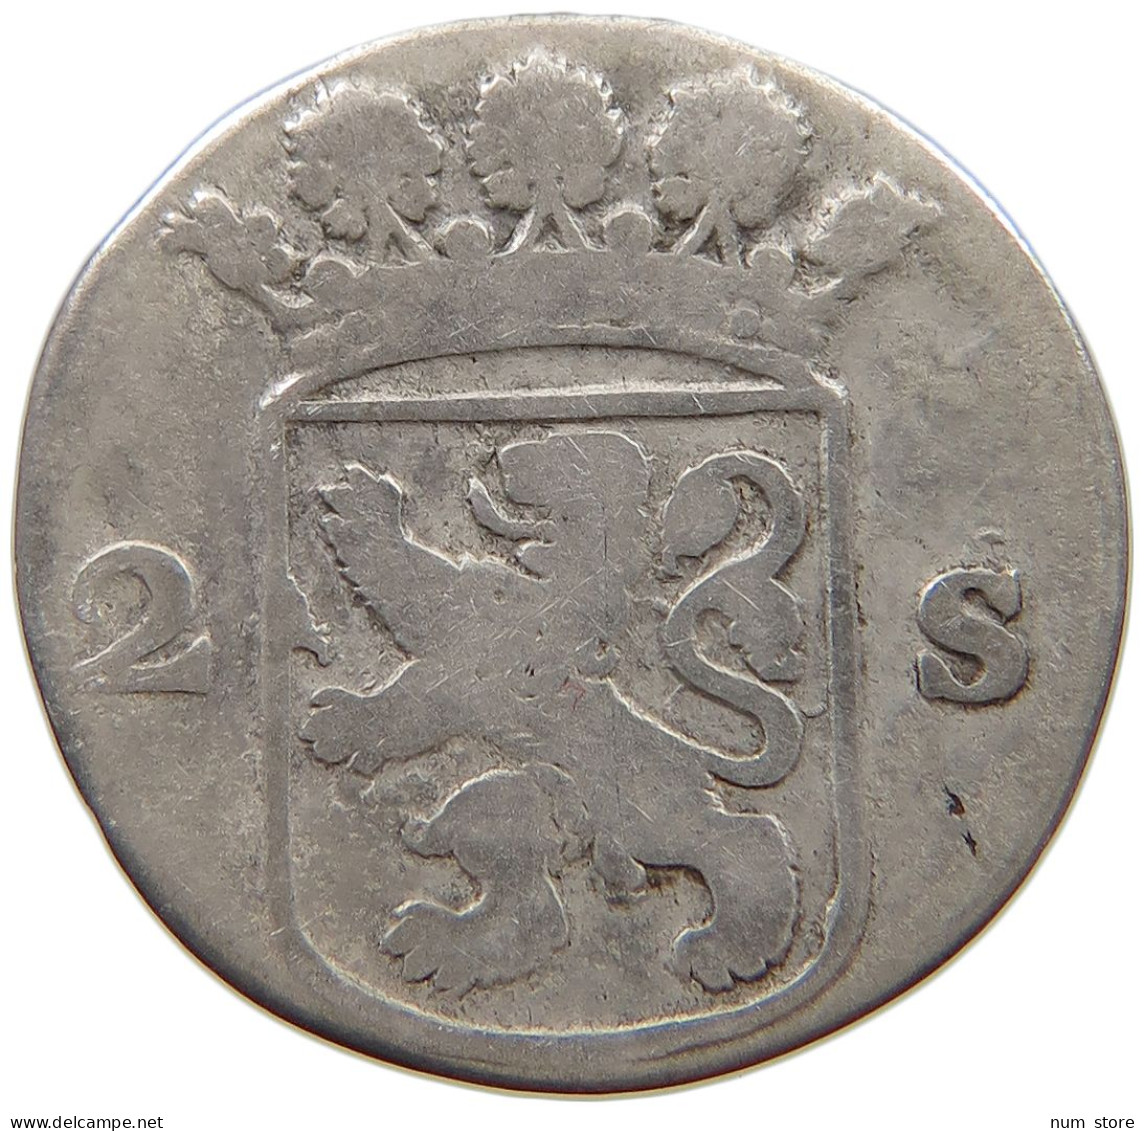 NETHERLANDS HOLLAND 2 STUIVERS 1736  #a082 0437 - Provincial Coinage